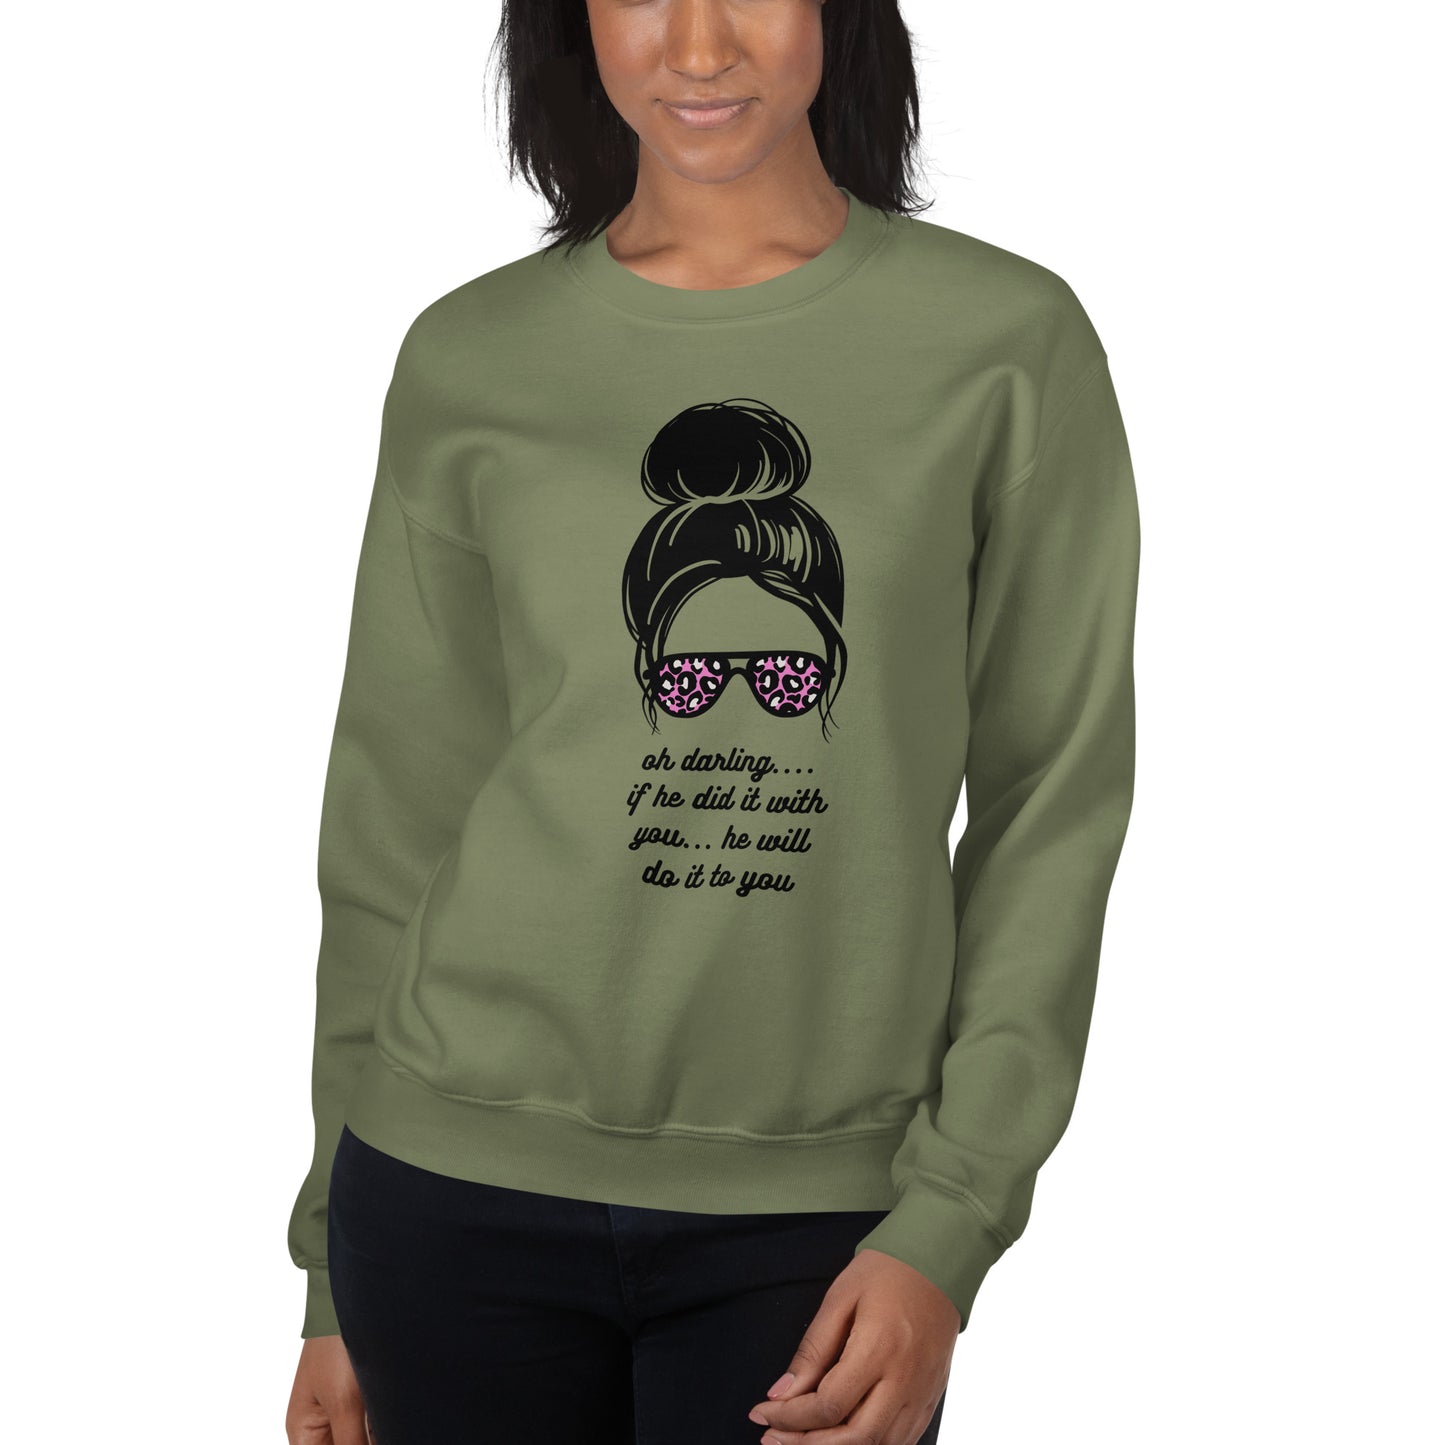 Unisex Sweatshirt - Oh Darling - If He Did it With You He'll Do It To You Sweatshirt Stylin' Spirit Military Green S 